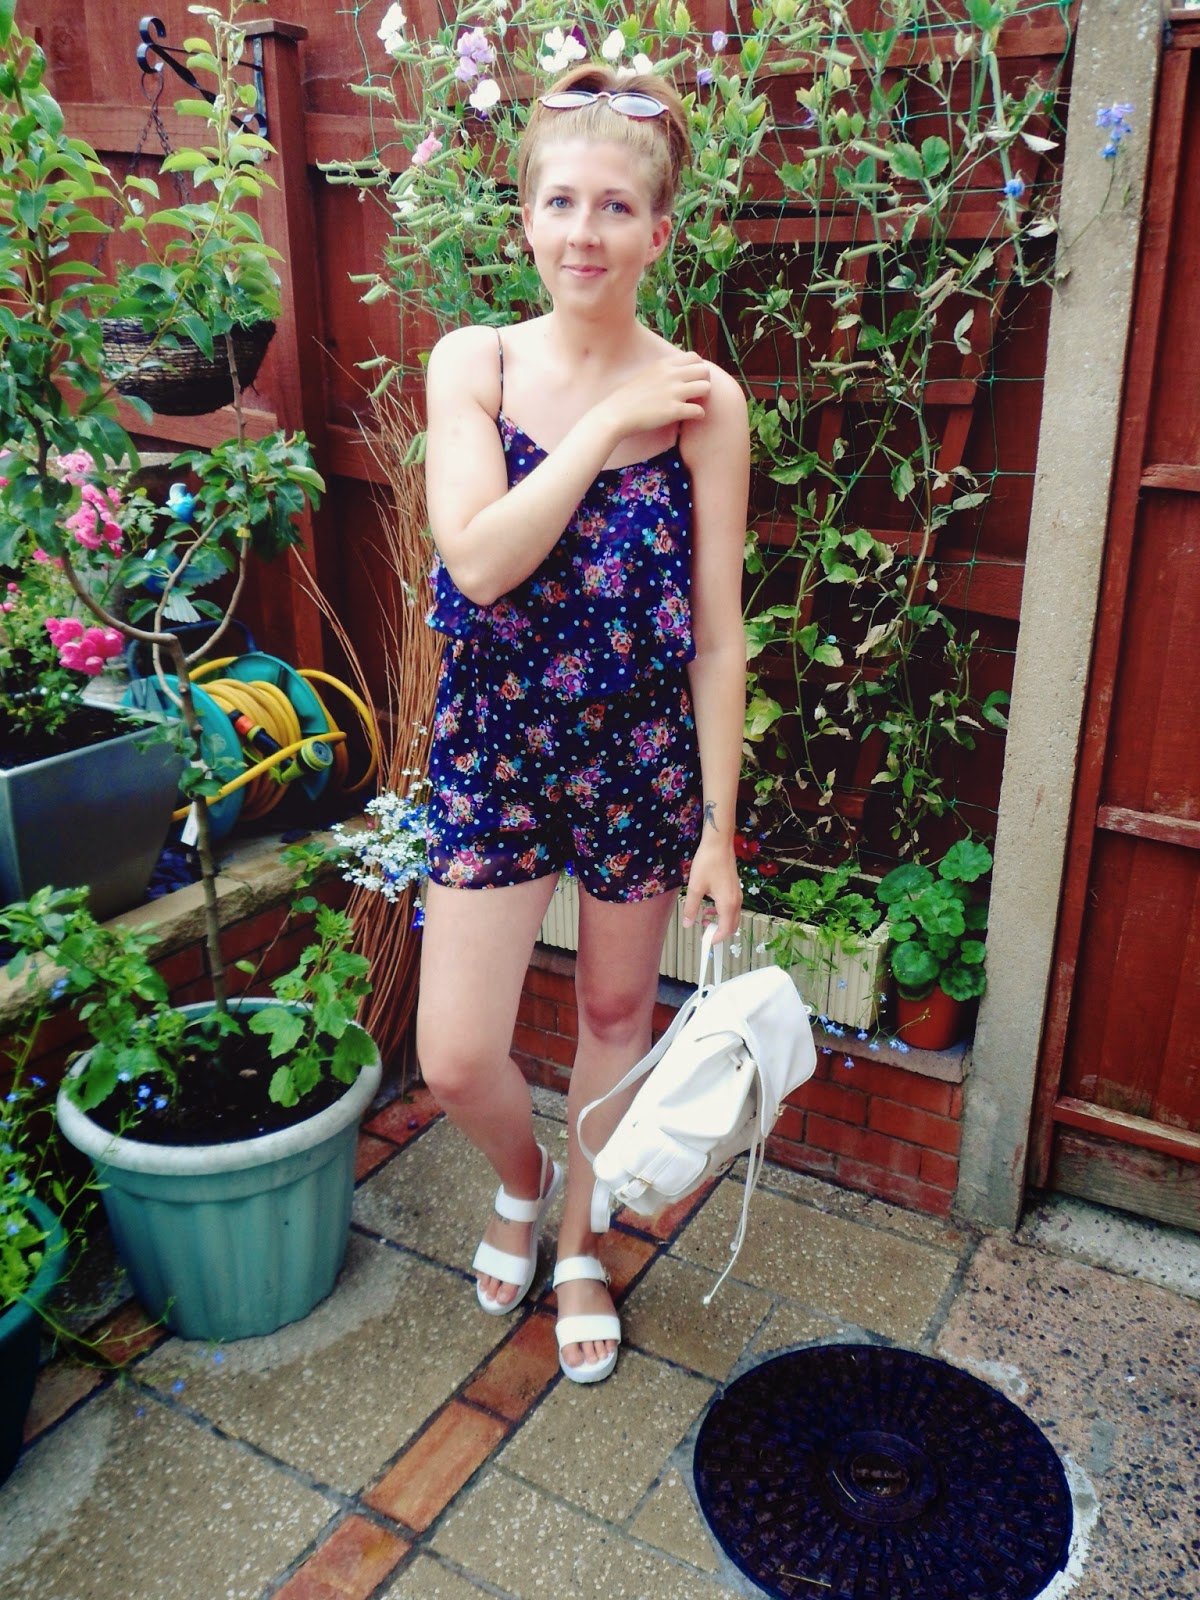 fashion, fashionbloggers, fbloggers, floral, ootd, outfitoftheday, playsuit, primark, rucksack, sunglasses, whatibought, whatimwearing, whatiwore, wiw